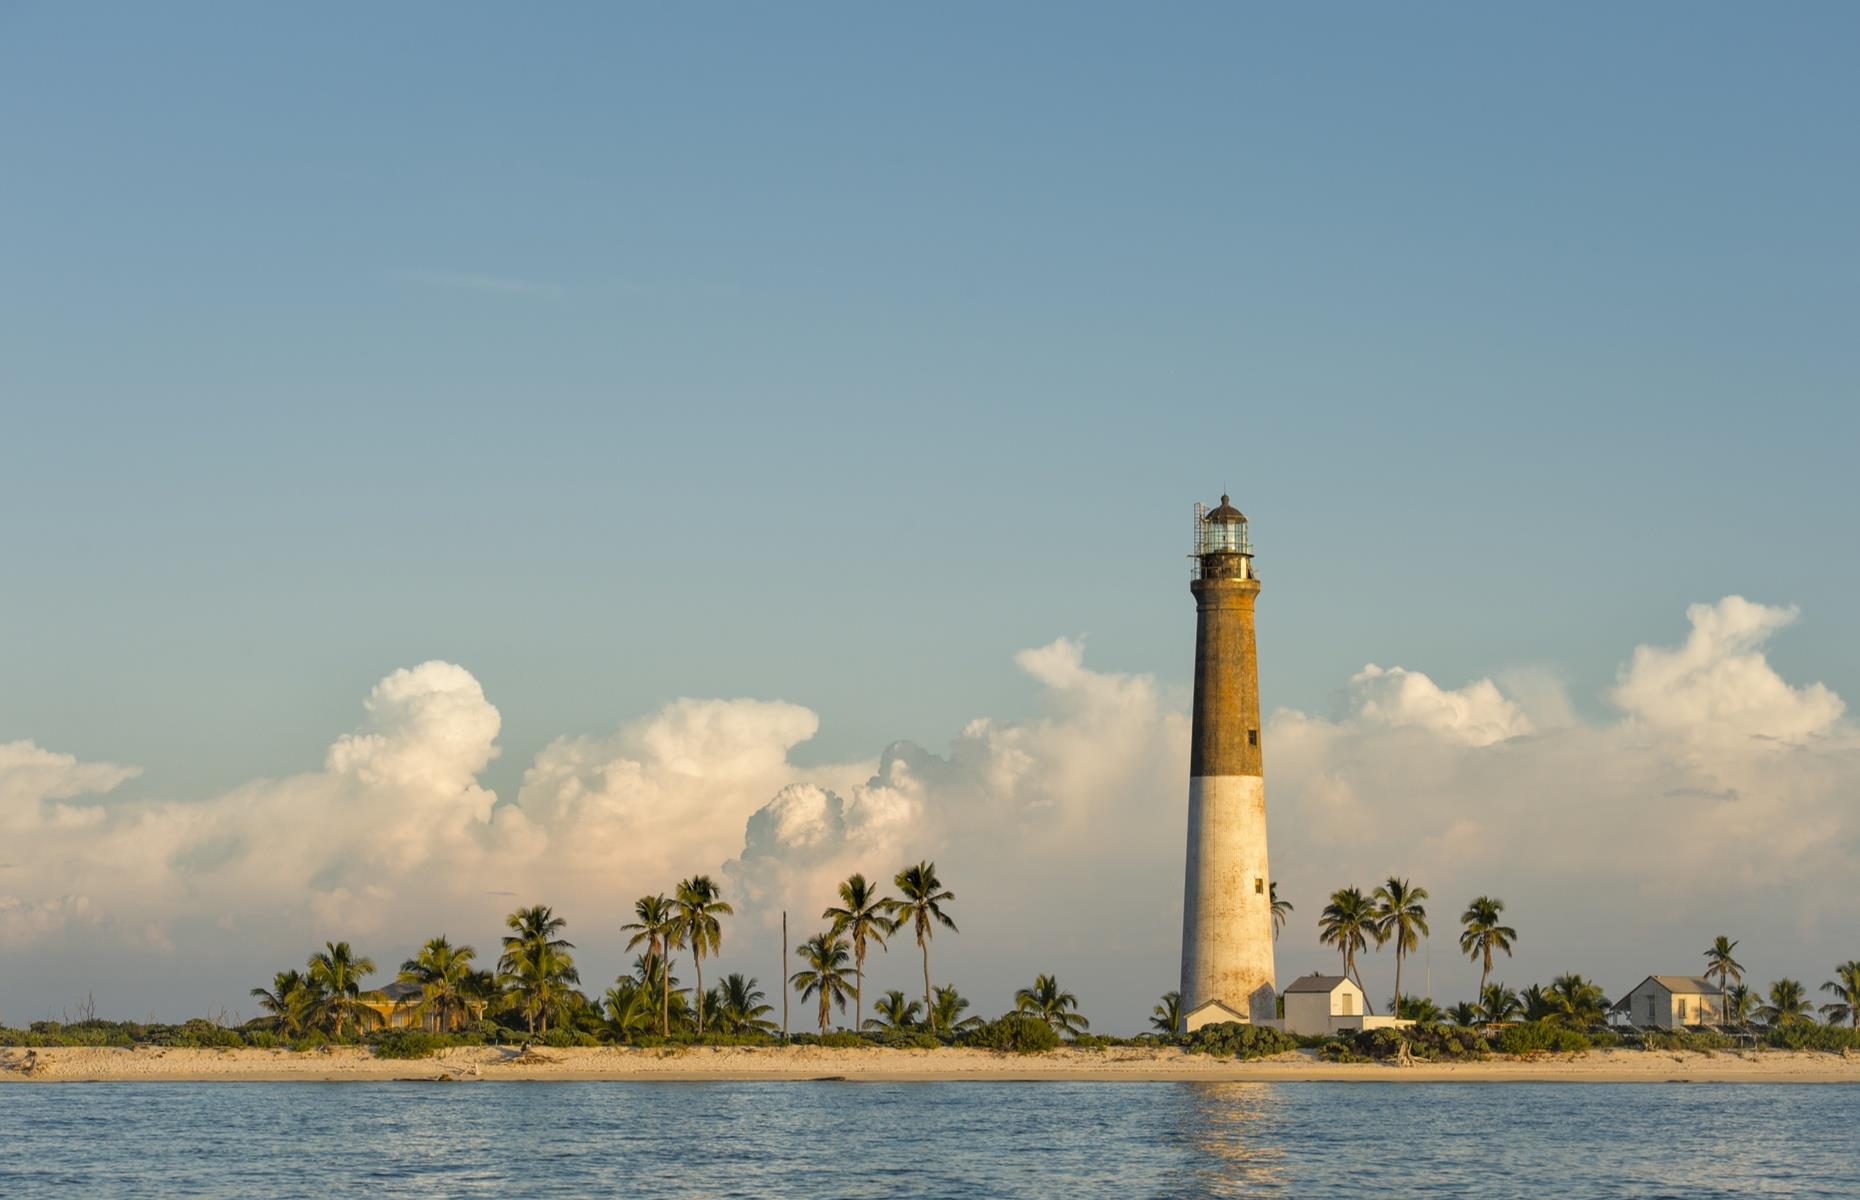 <p>Loggerhead Lighthouse is about as remote as they come. Which makes it all the more surprising that the 150-foot (46m) tall tower, located on Loggerhead Key in the Dry Tortugas islands – even further west than Key West – was the second lighthouse to be built in this archipelago. The first, Tortugas Harbor Light was erected in 1826 but by the mid-19th century, an increase in shipwrecks in the area led to the construction of Loggerhead Lighthouse in 1858. </p>  <p><a href="https://www.loveexploring.com/gallerylist/69708/american-islands-that-arent-in-north-america"><strong>Discover these American islands that aren't in North America</strong></a></p>